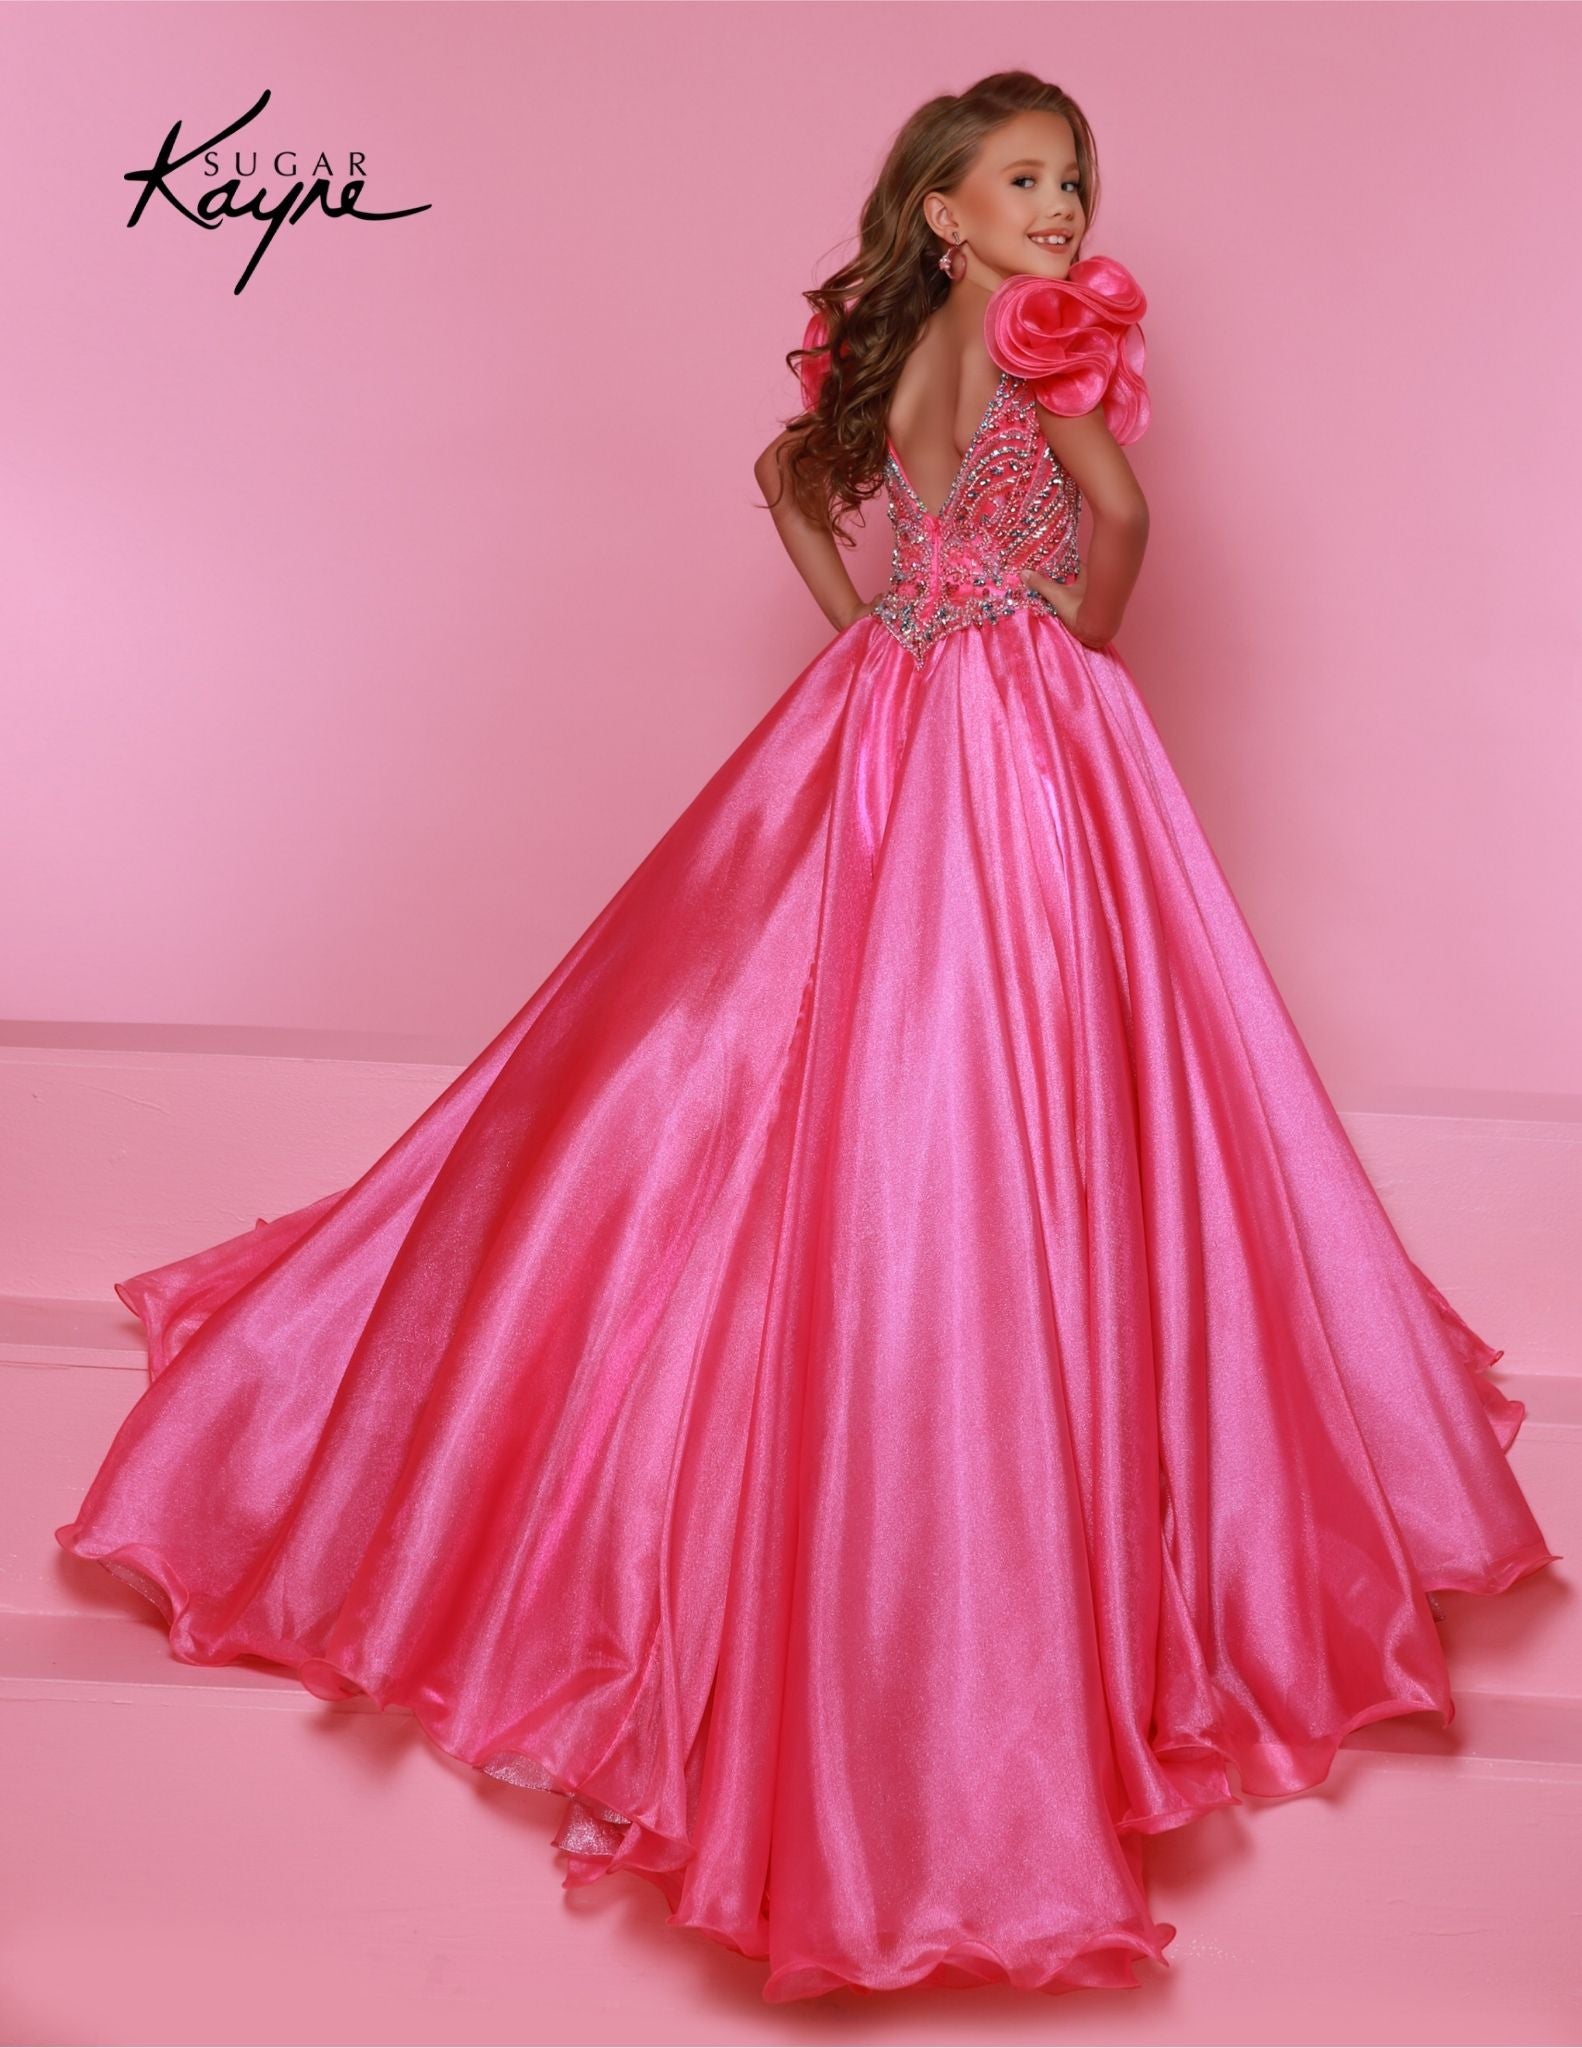 Bring out her inner beauty with this Sugar Kayne C334 Girls Pageant Dress. This luxurious dress is made from iridescent organza and features a sweetheart neckline and long ball gown skirt. Perfect for any special occasion. Transform into a twinkling starlet with this Metallic Organza Gown. The beaded bodice adds a touch of sparkle to this enchanting ensemble. The delicate ruffle sleeves create a charming look!